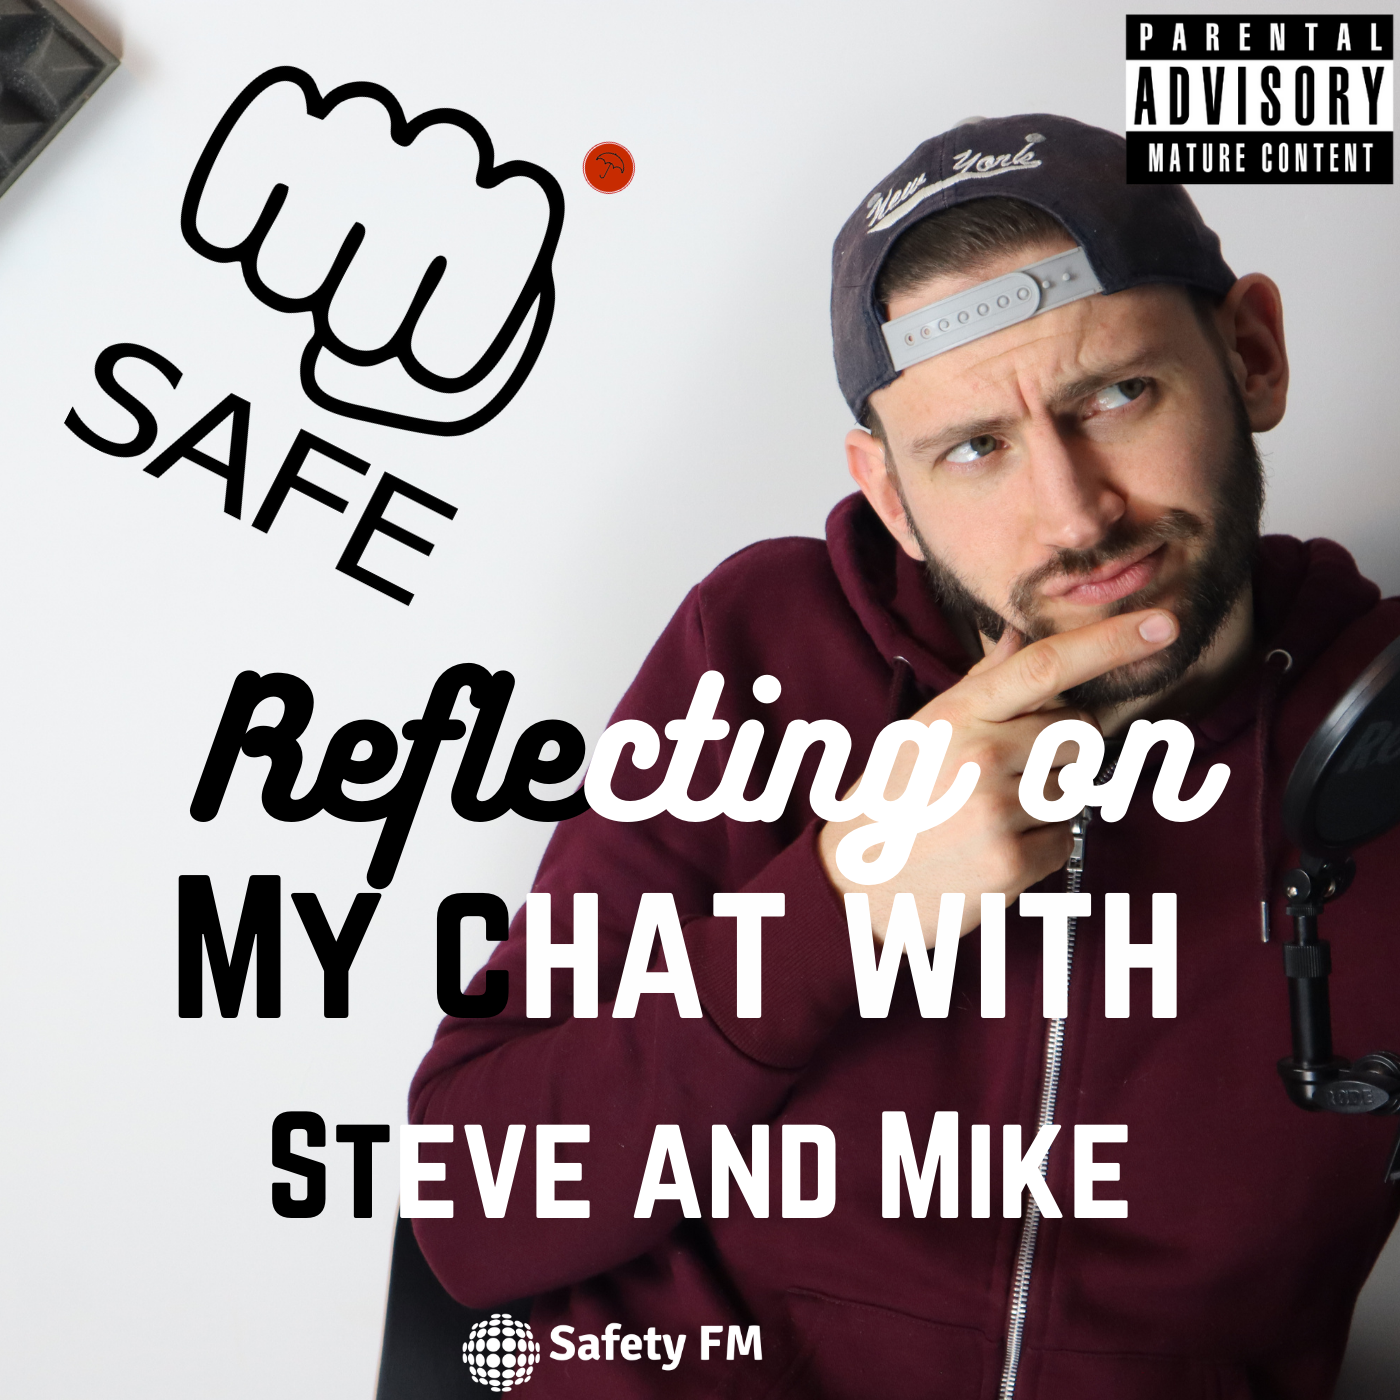 Reflecting on my chat with Mike and Steve